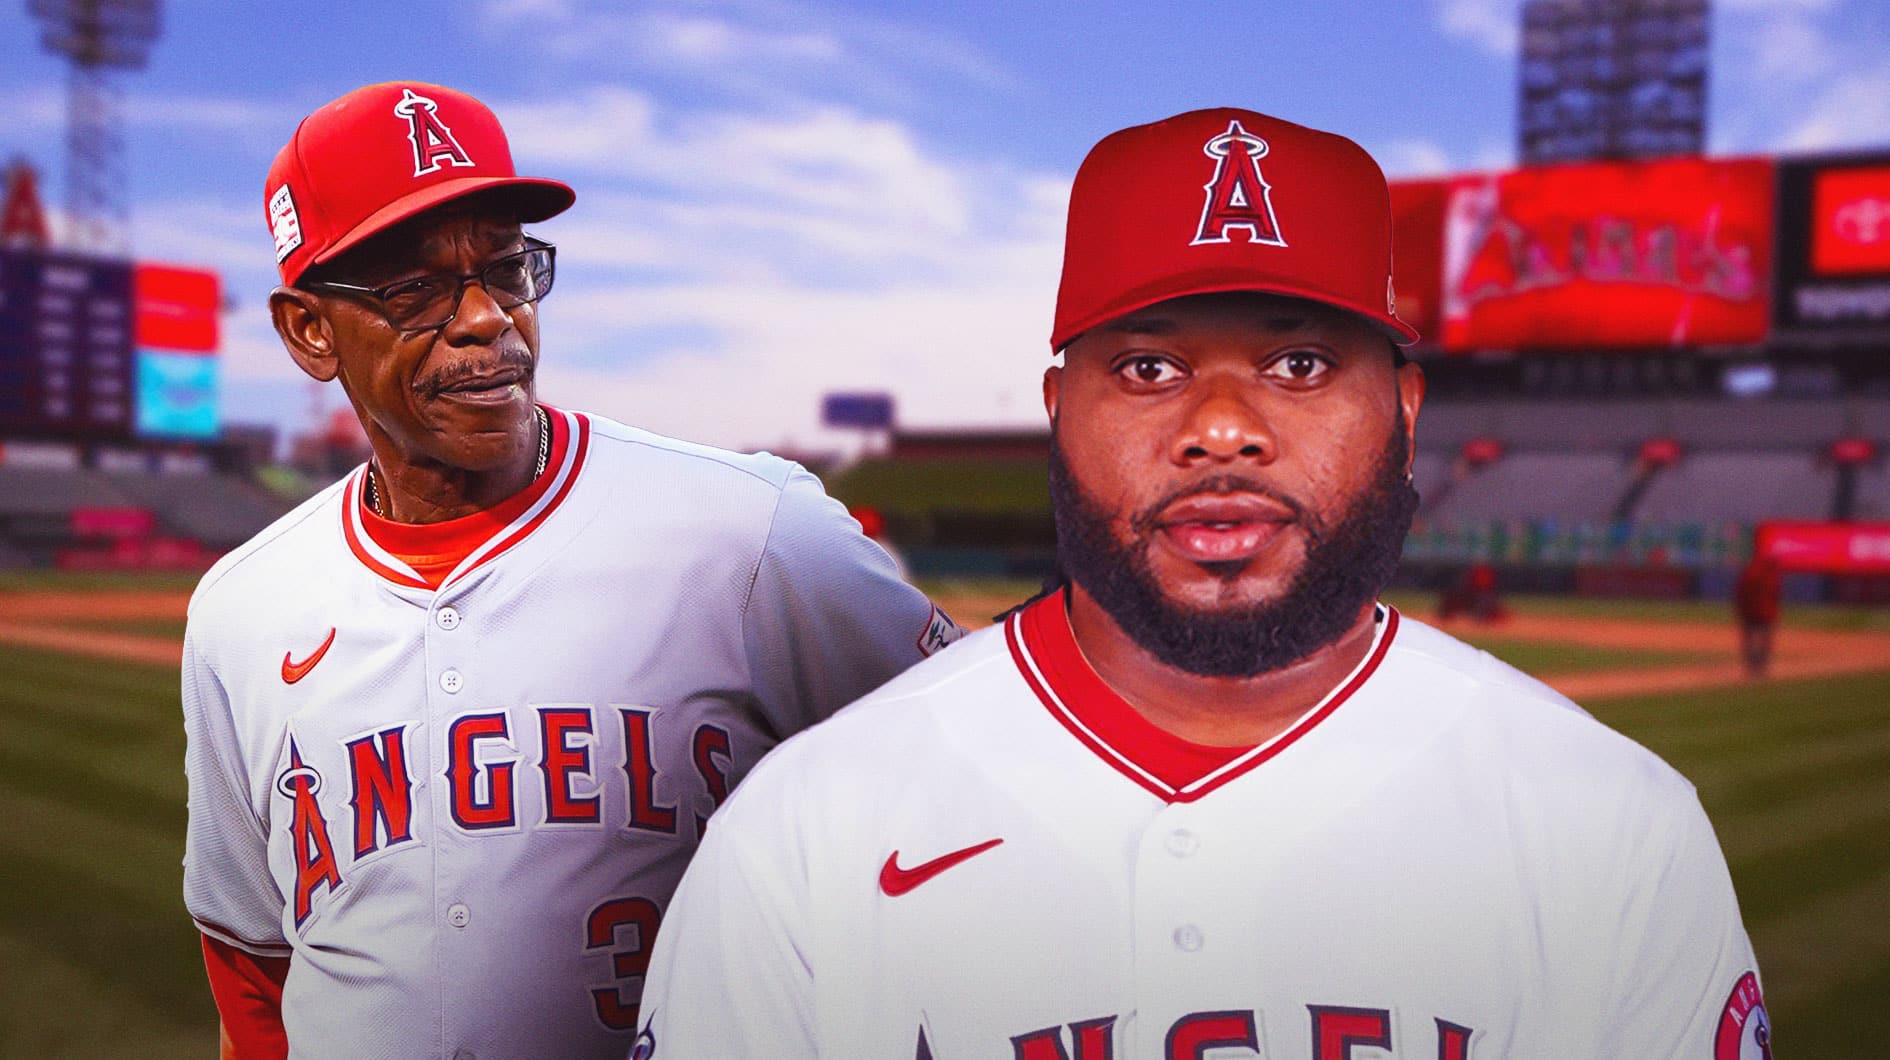 Angels catch attention after agreeing to deal with former strikeout leader